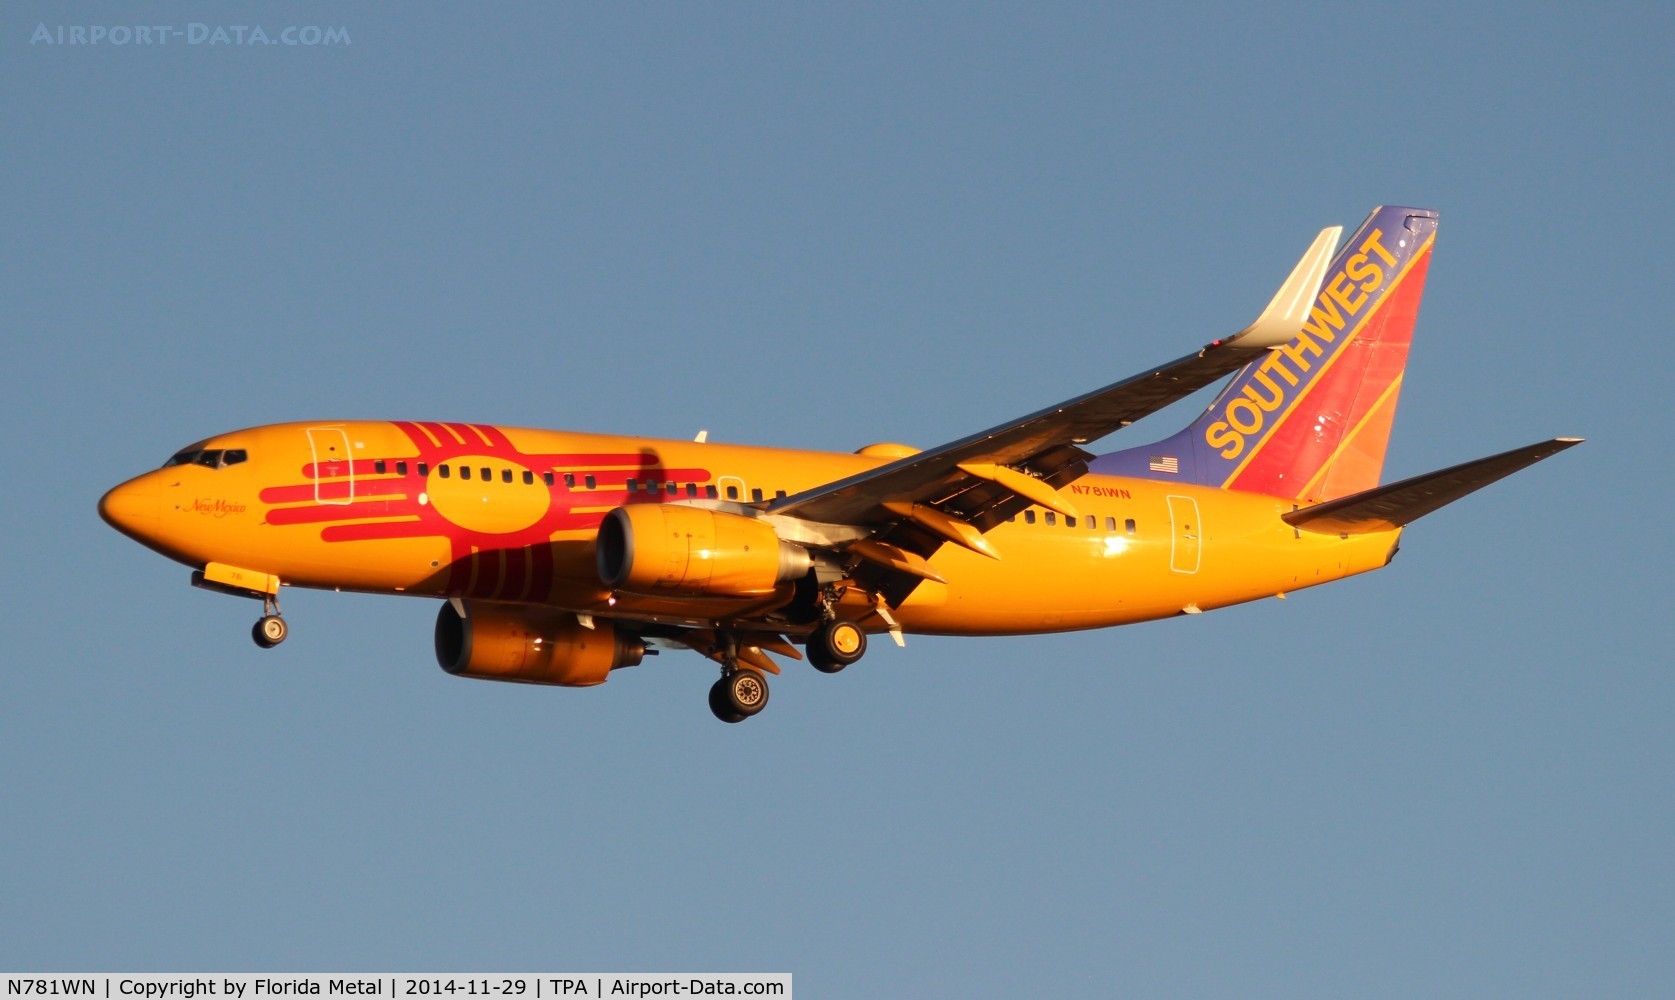 N781WN, 2000 Boeing 737-7H4 C/N 30601, New Mexico One